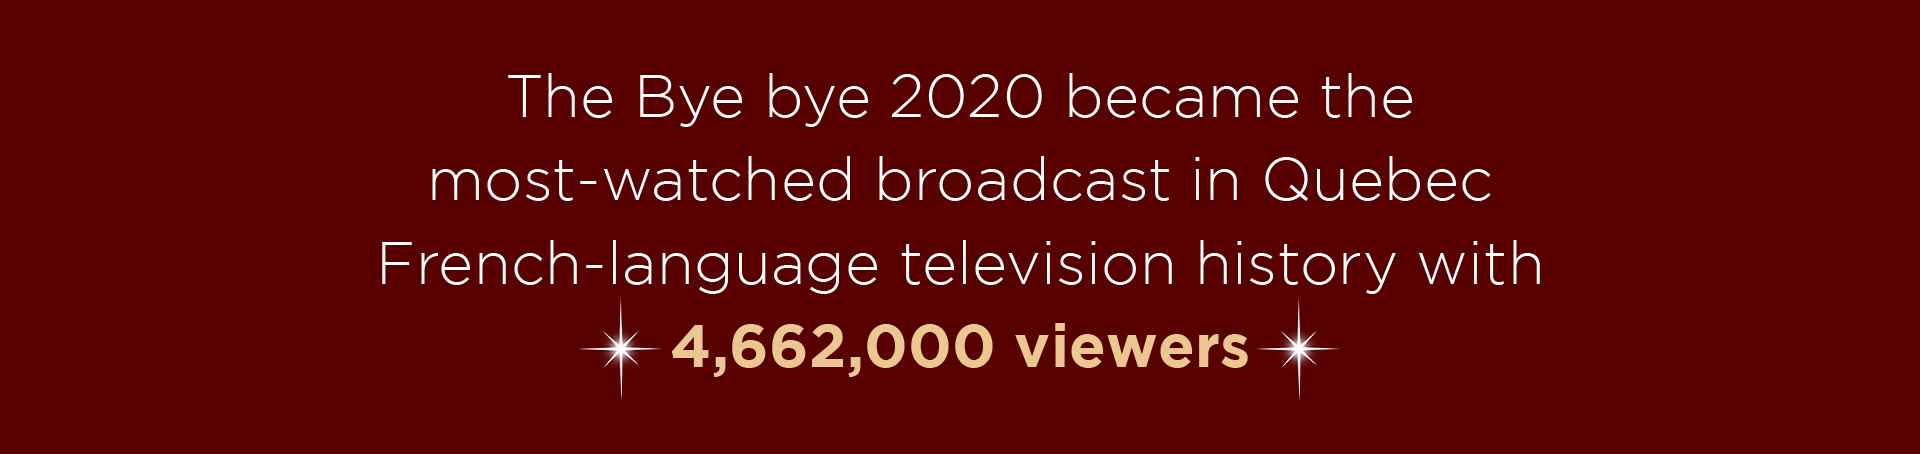 The Bye bye 2020 became the most-watched broadcast in Quebec French-language television history with 4,662,000 viewers